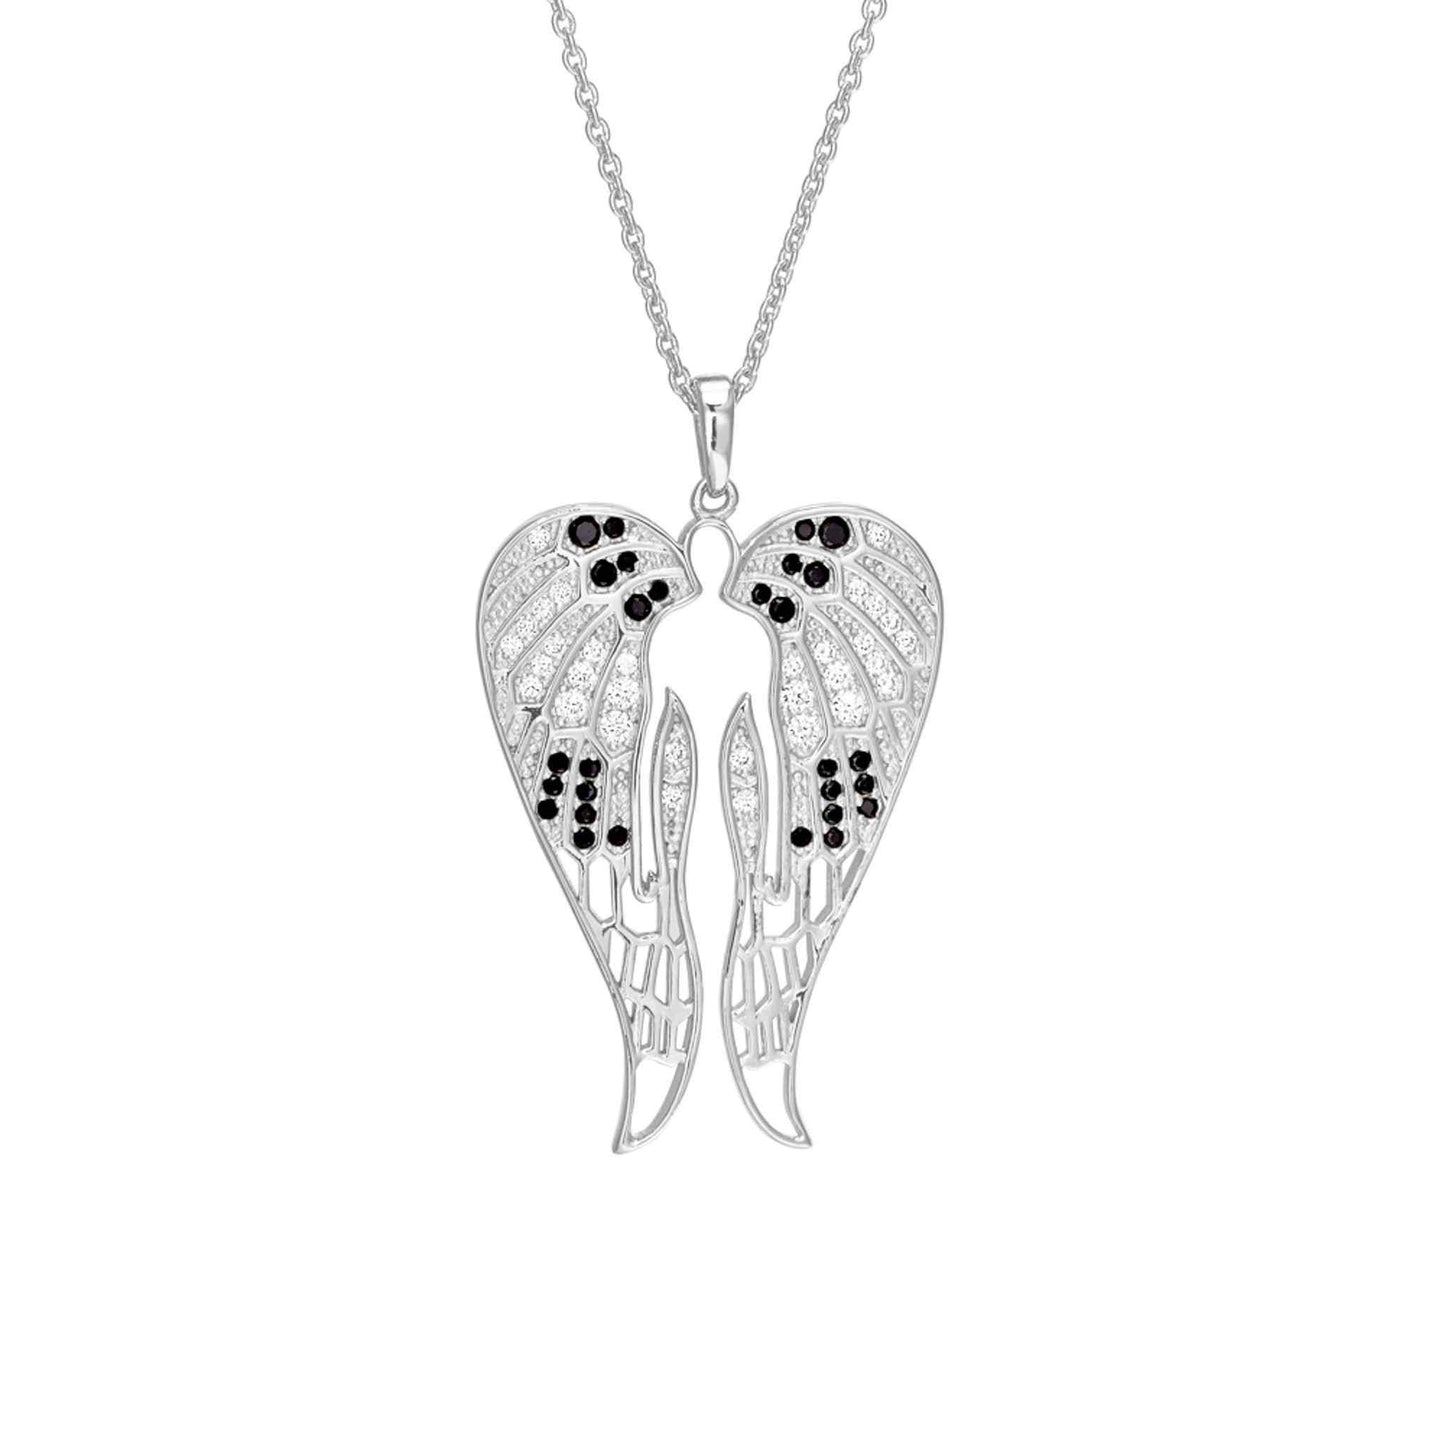 A angel wings necklace with simulated diamonds displayed on a neutral white background.